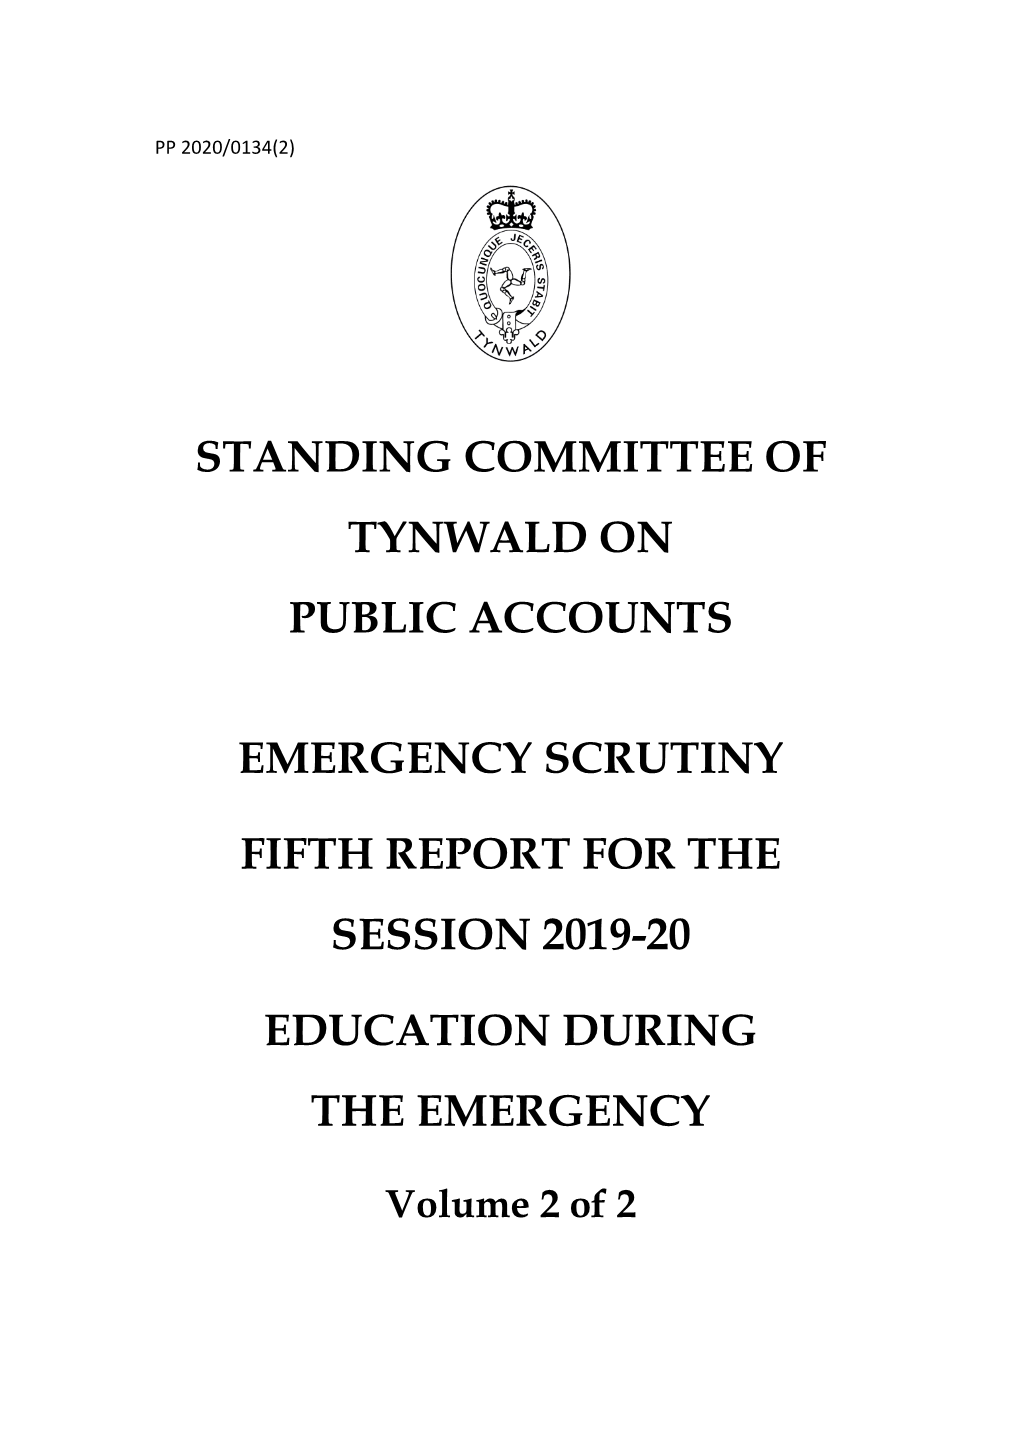 Standing Committee of Tynwald on Public Accounts Emergency Scrutiny Fifth Report for the Session 2019-20 Education During the Emergency